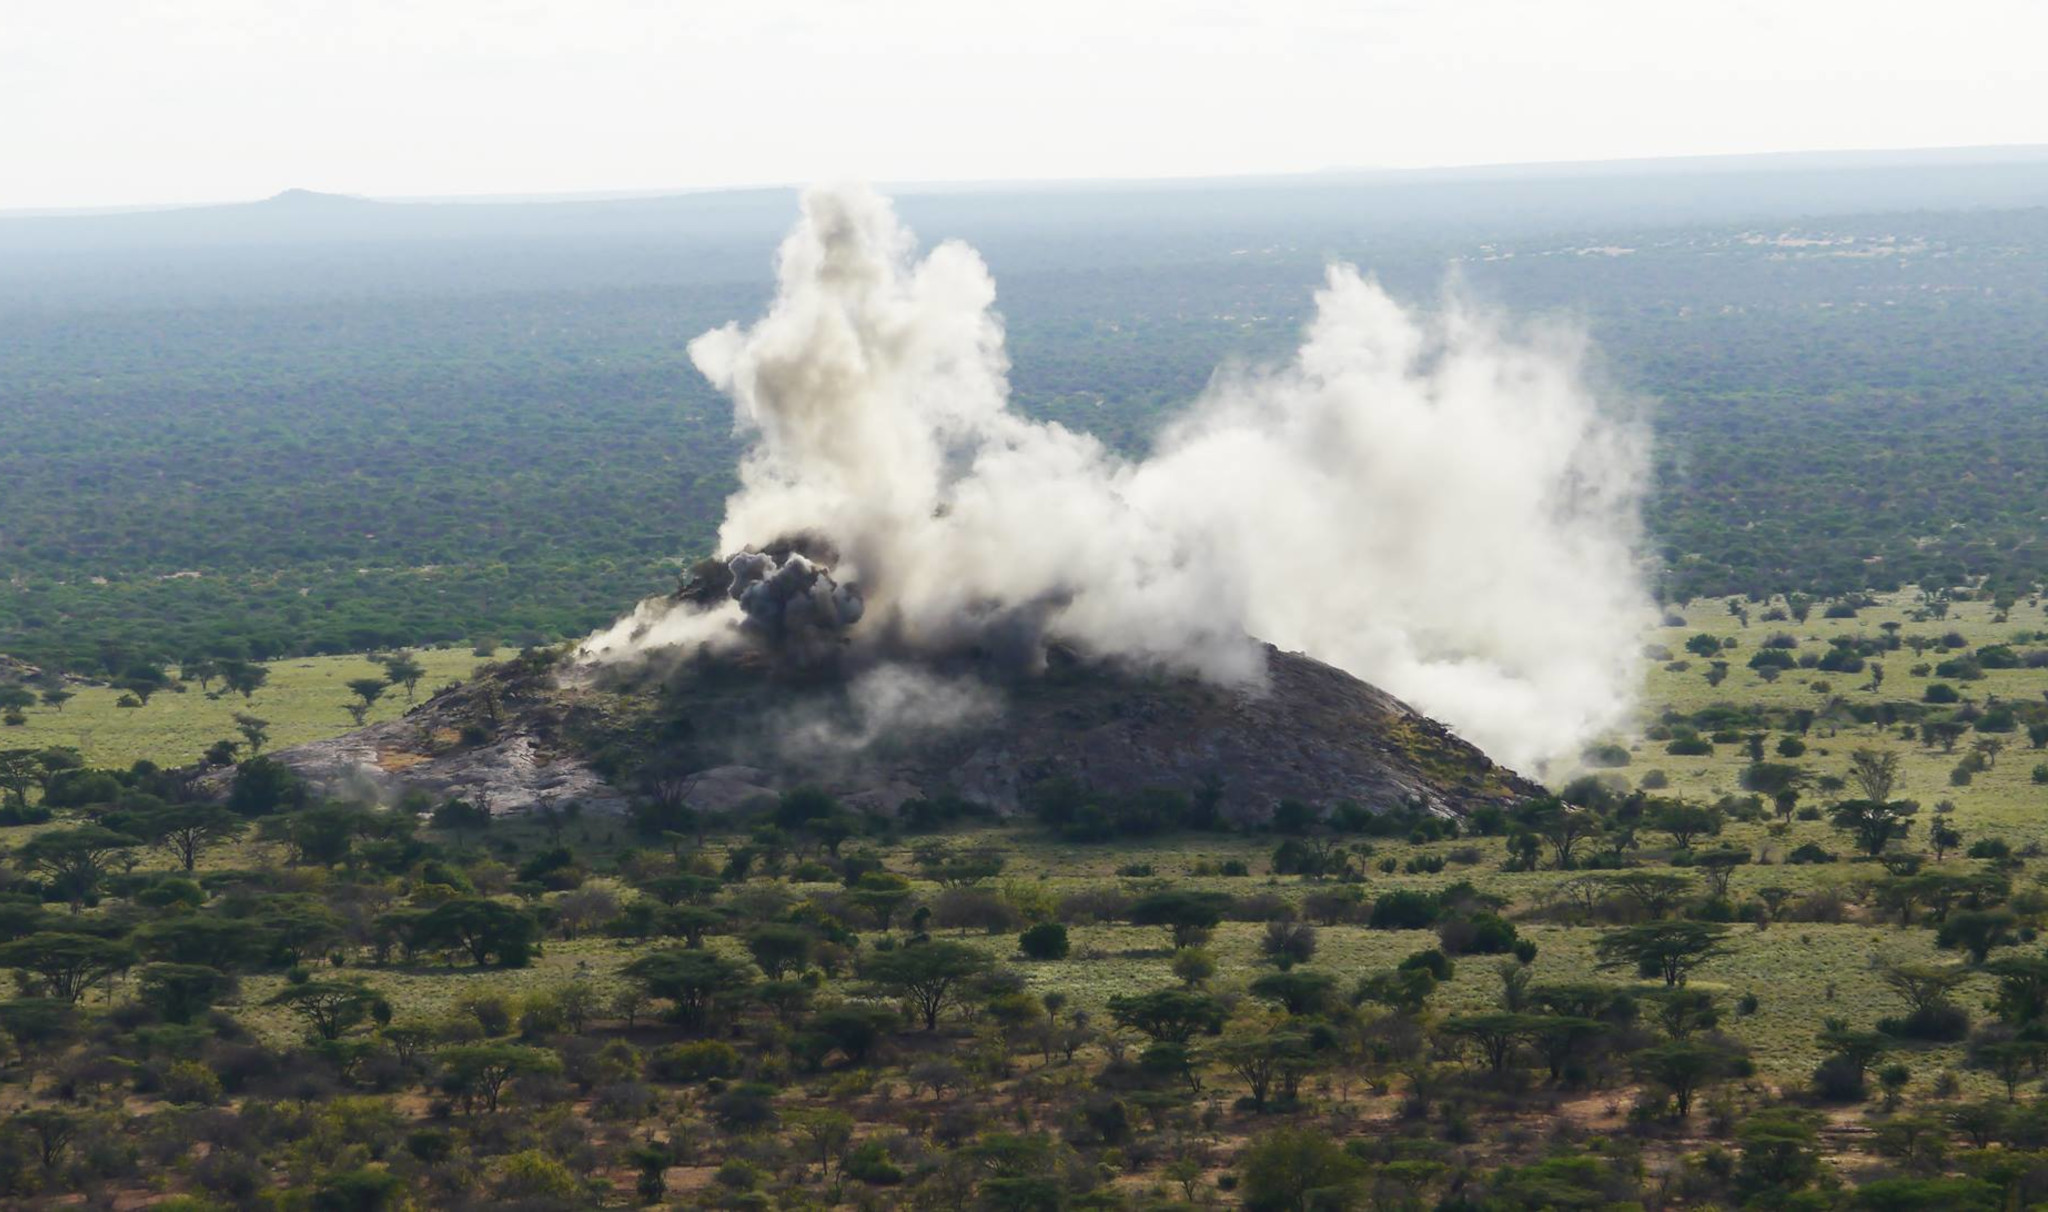 Mortars fired by British troops explode in Kenya. (Photo: MOD)